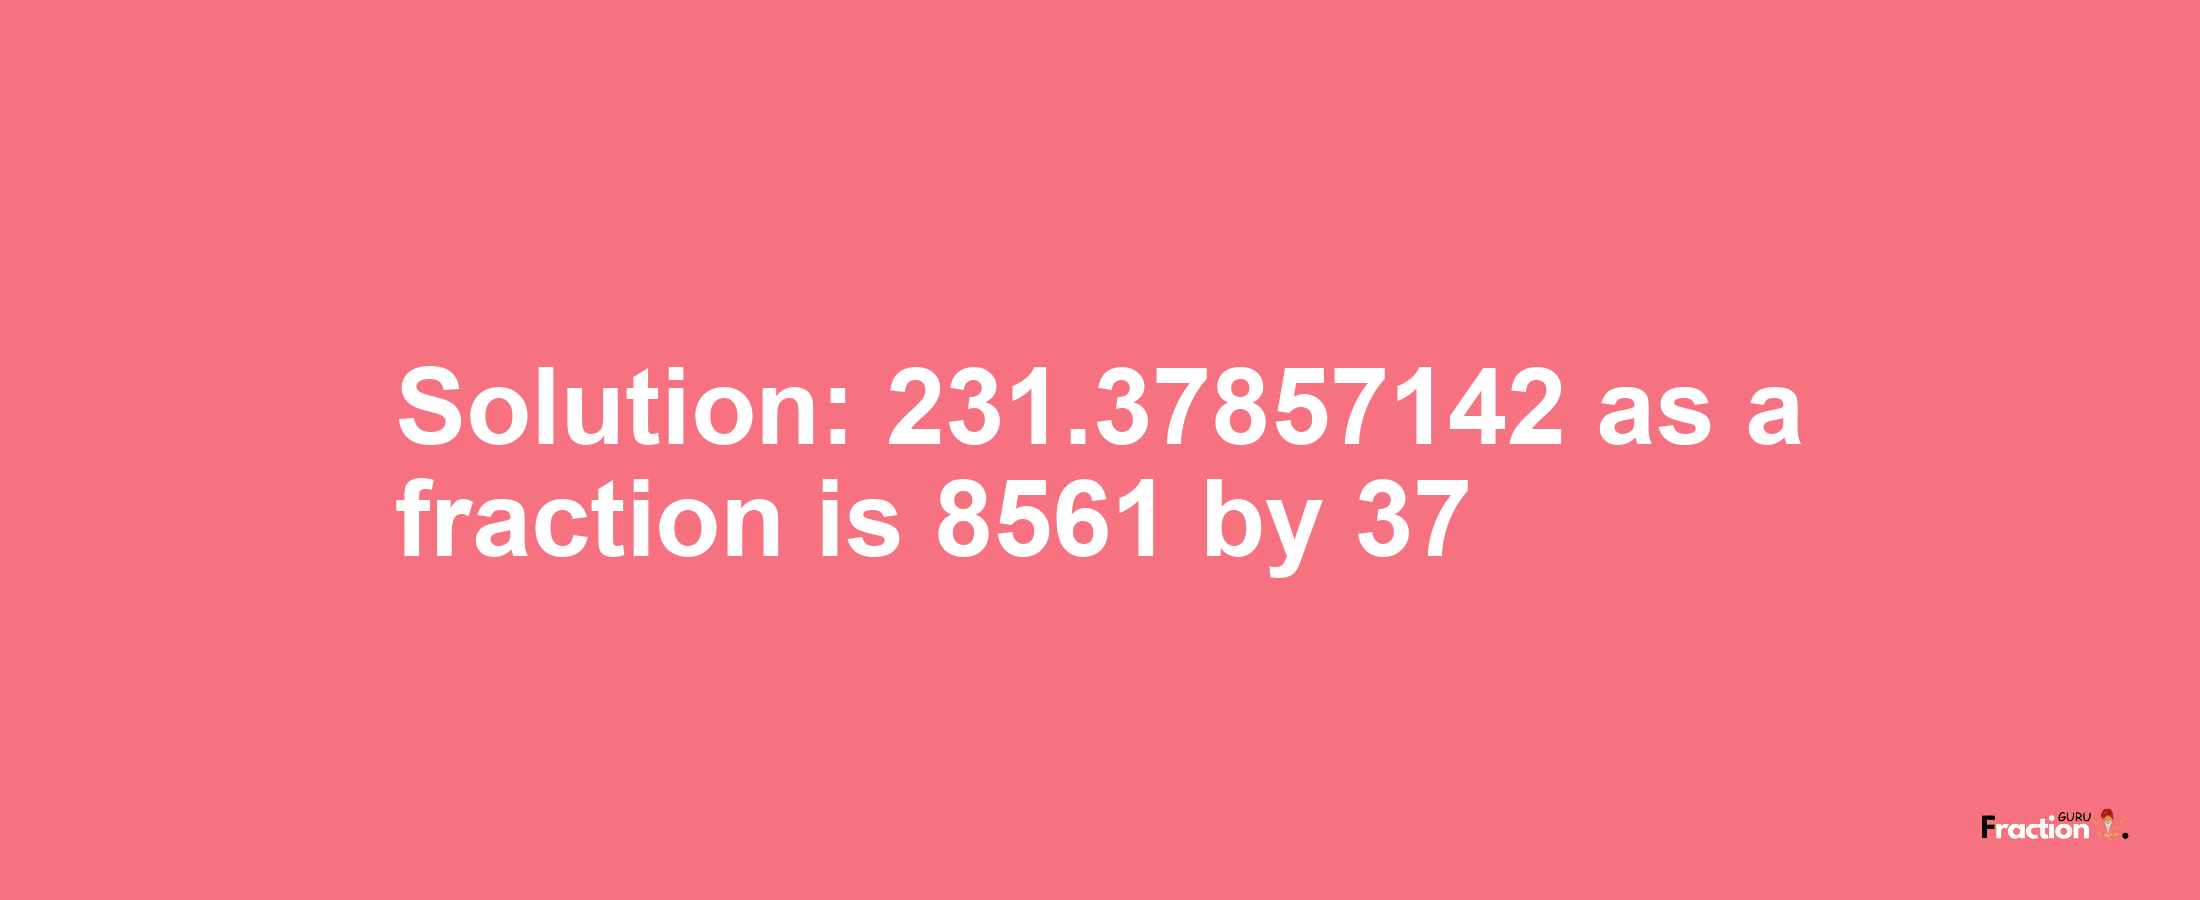 Solution:231.37857142 as a fraction is 8561/37